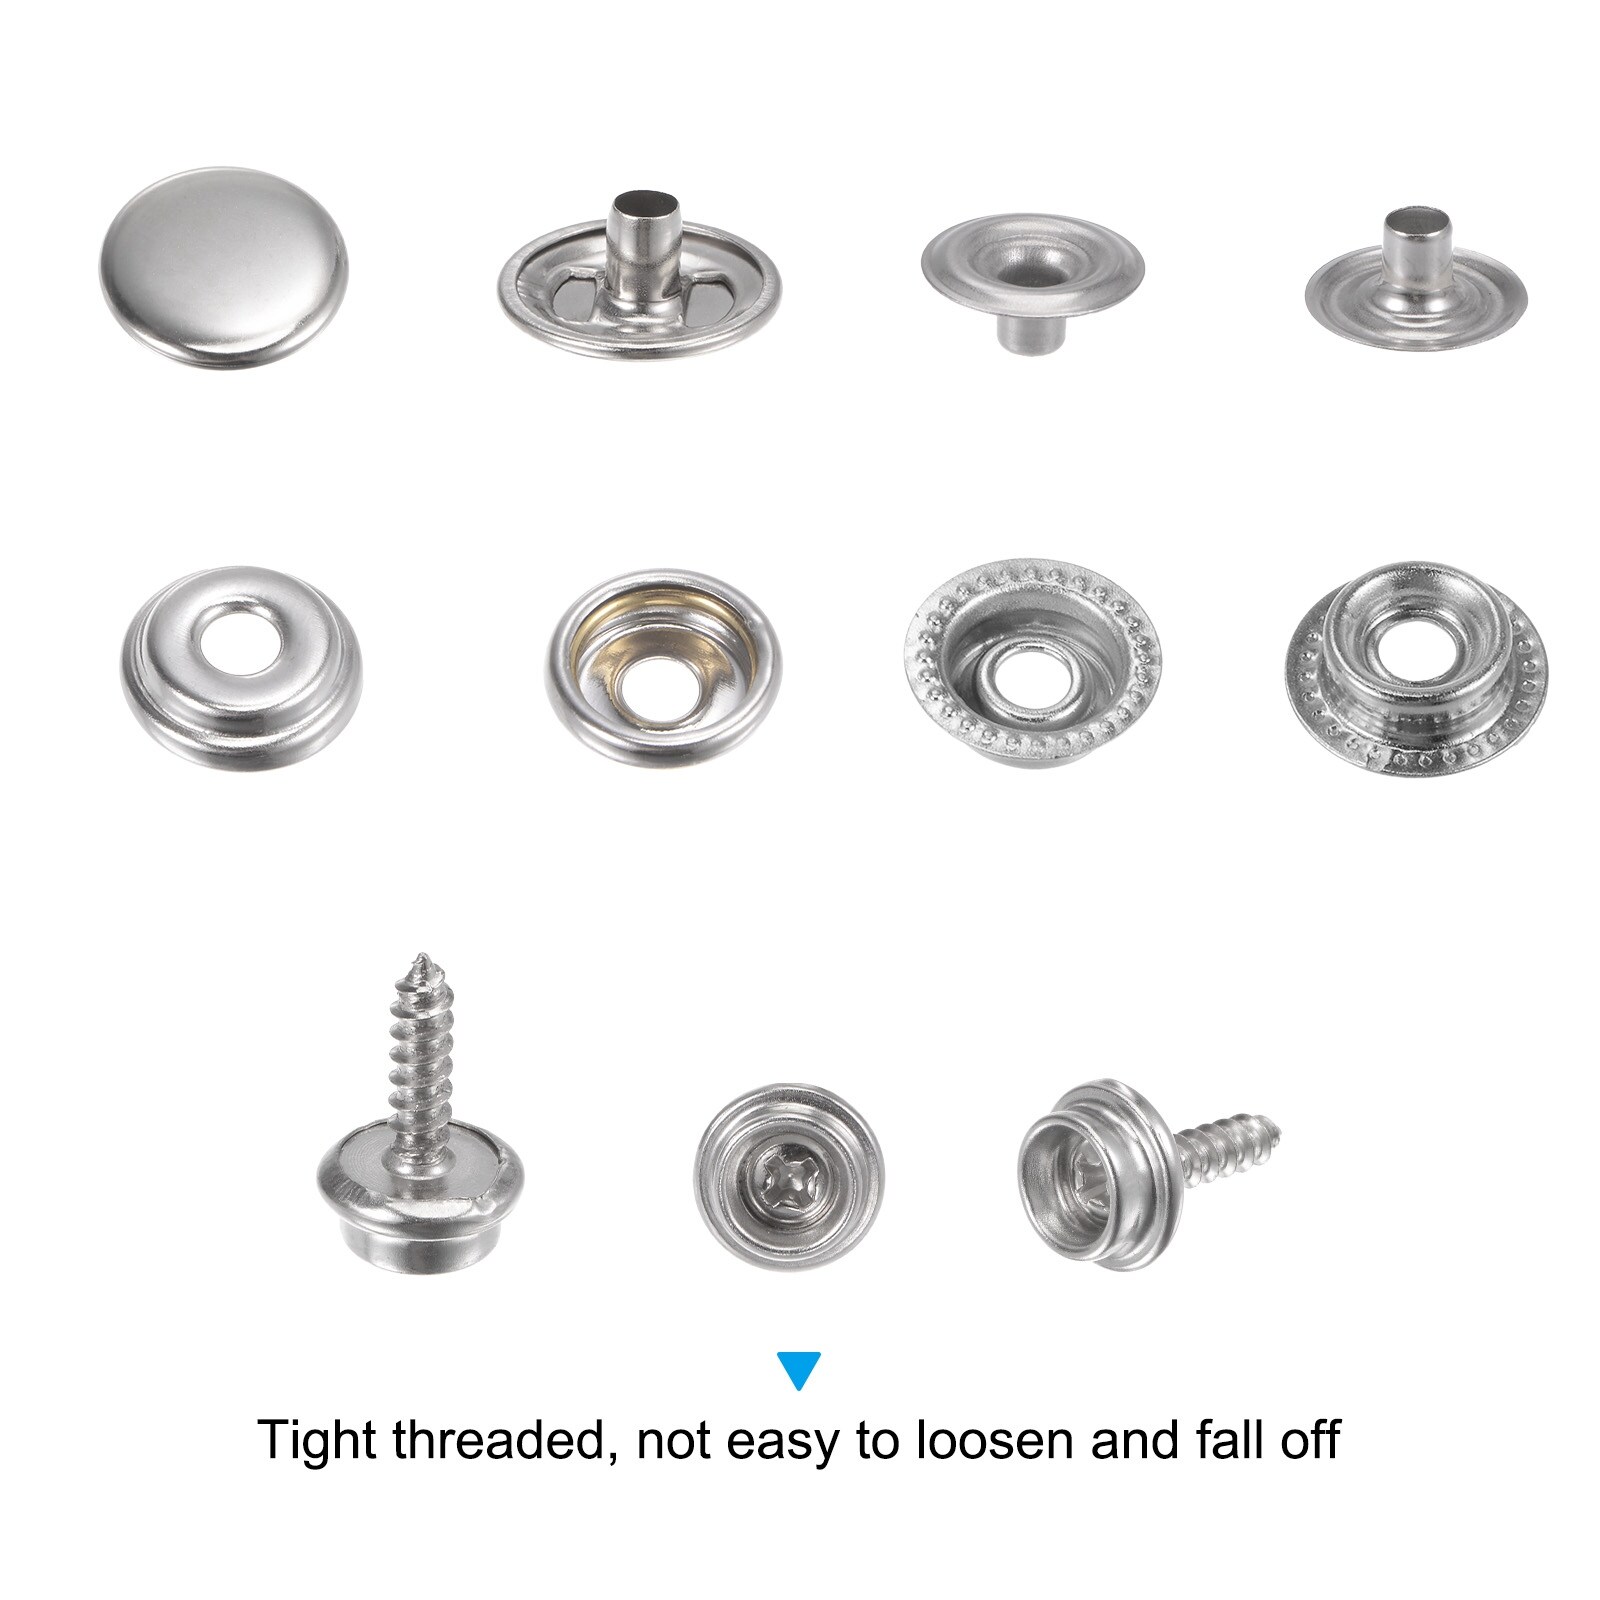 Unique Bargains 10 Sets Screw Snap Kit 10mm Stainless Steel Snaps Button with Tool, Silver Tone - Silver Tone